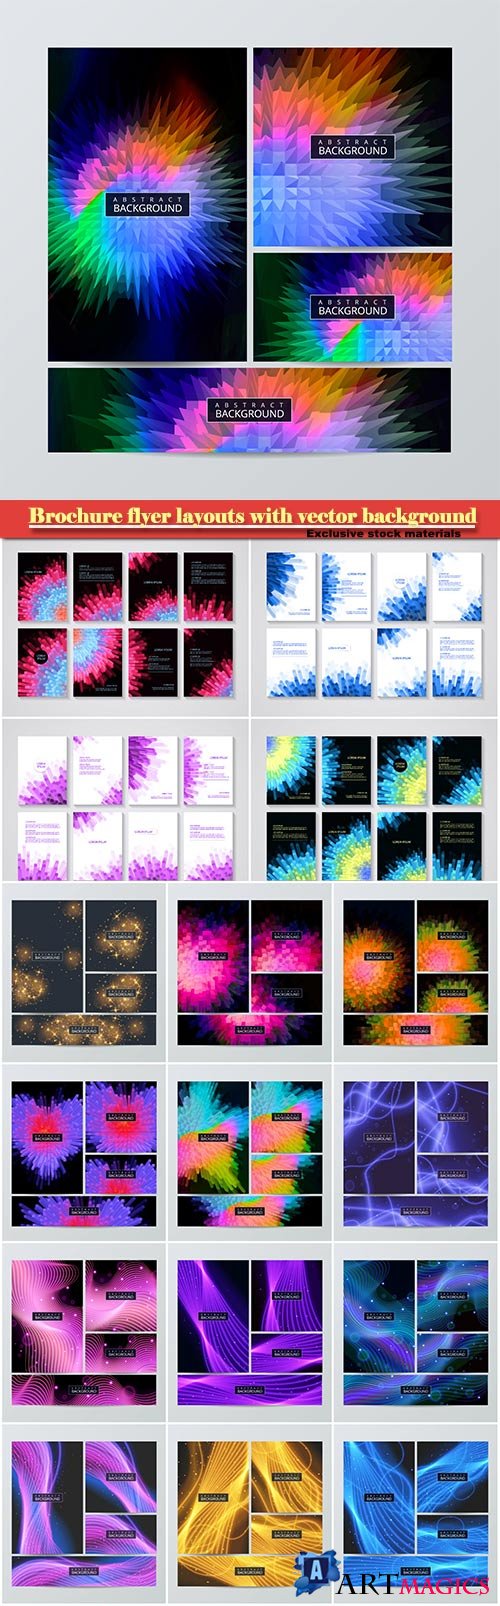 Brochure flyer layouts with vector abstract colorful background